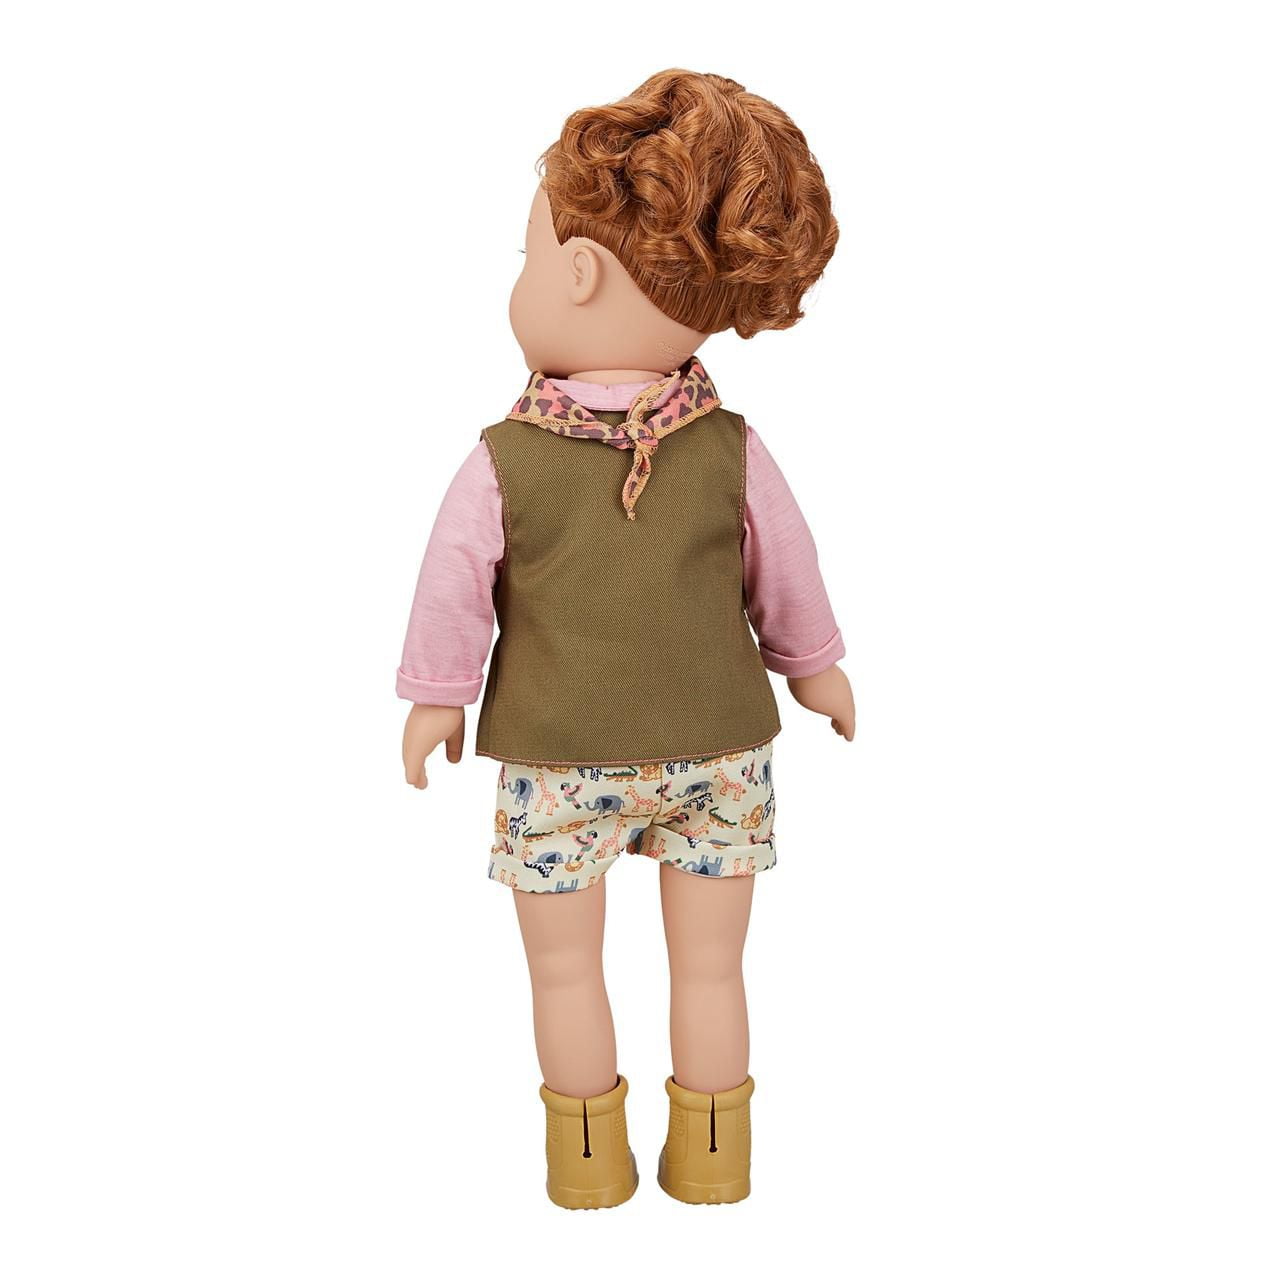 My Life As Makenna Poseable 18 Inch Doll, Red Hair, Green Eyes 